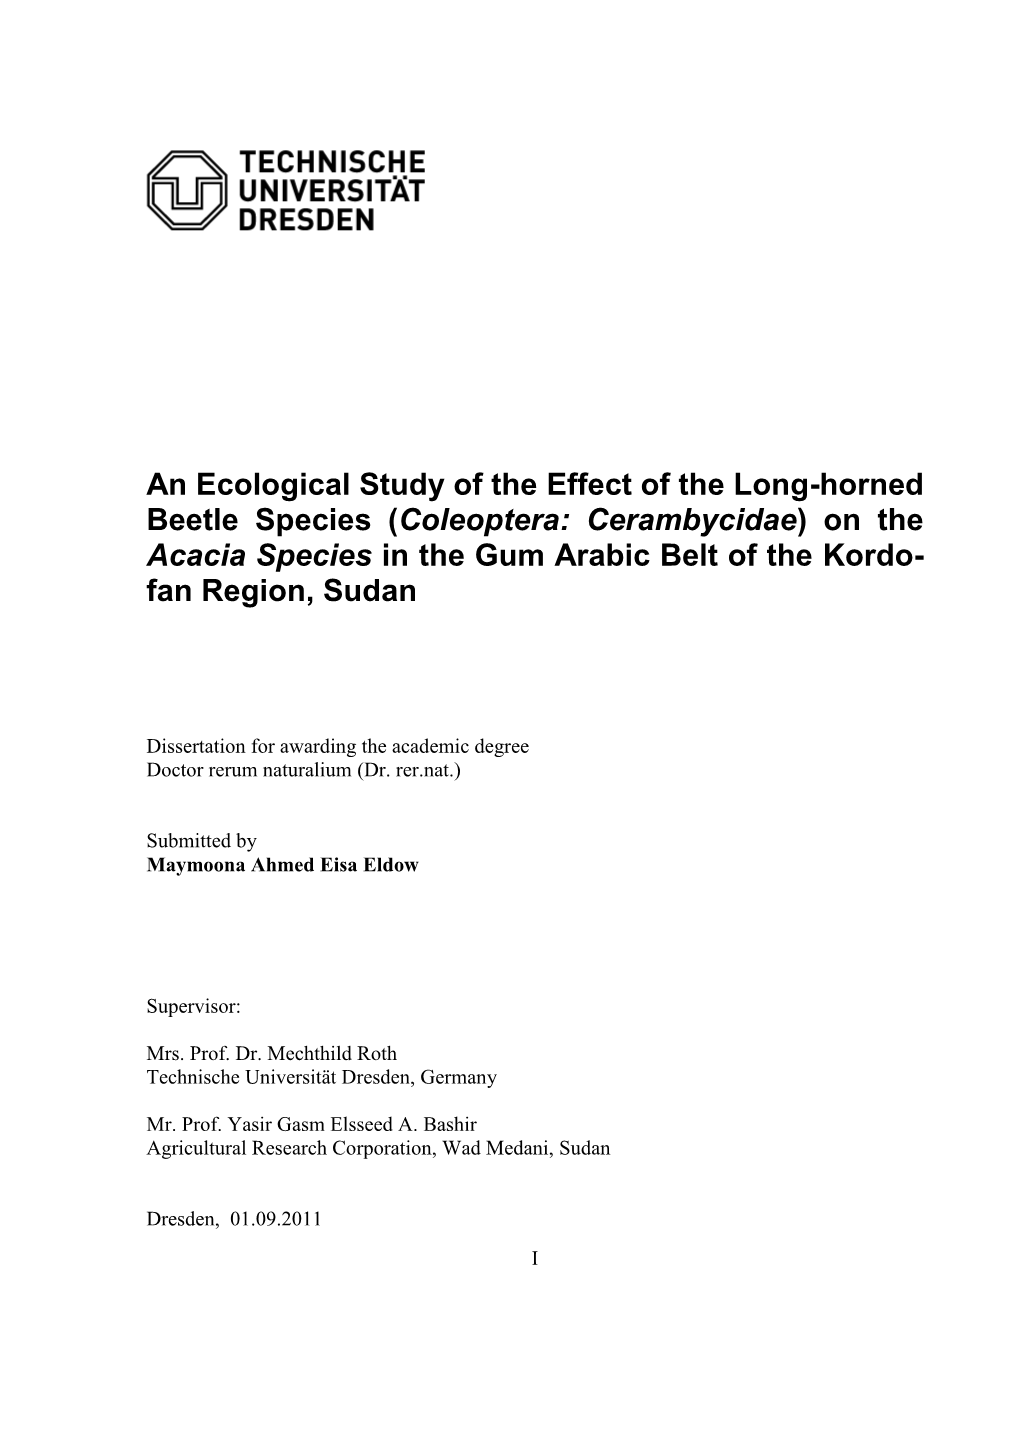 An Ecological Study of the Effect of the Long-Horned Beetle Species